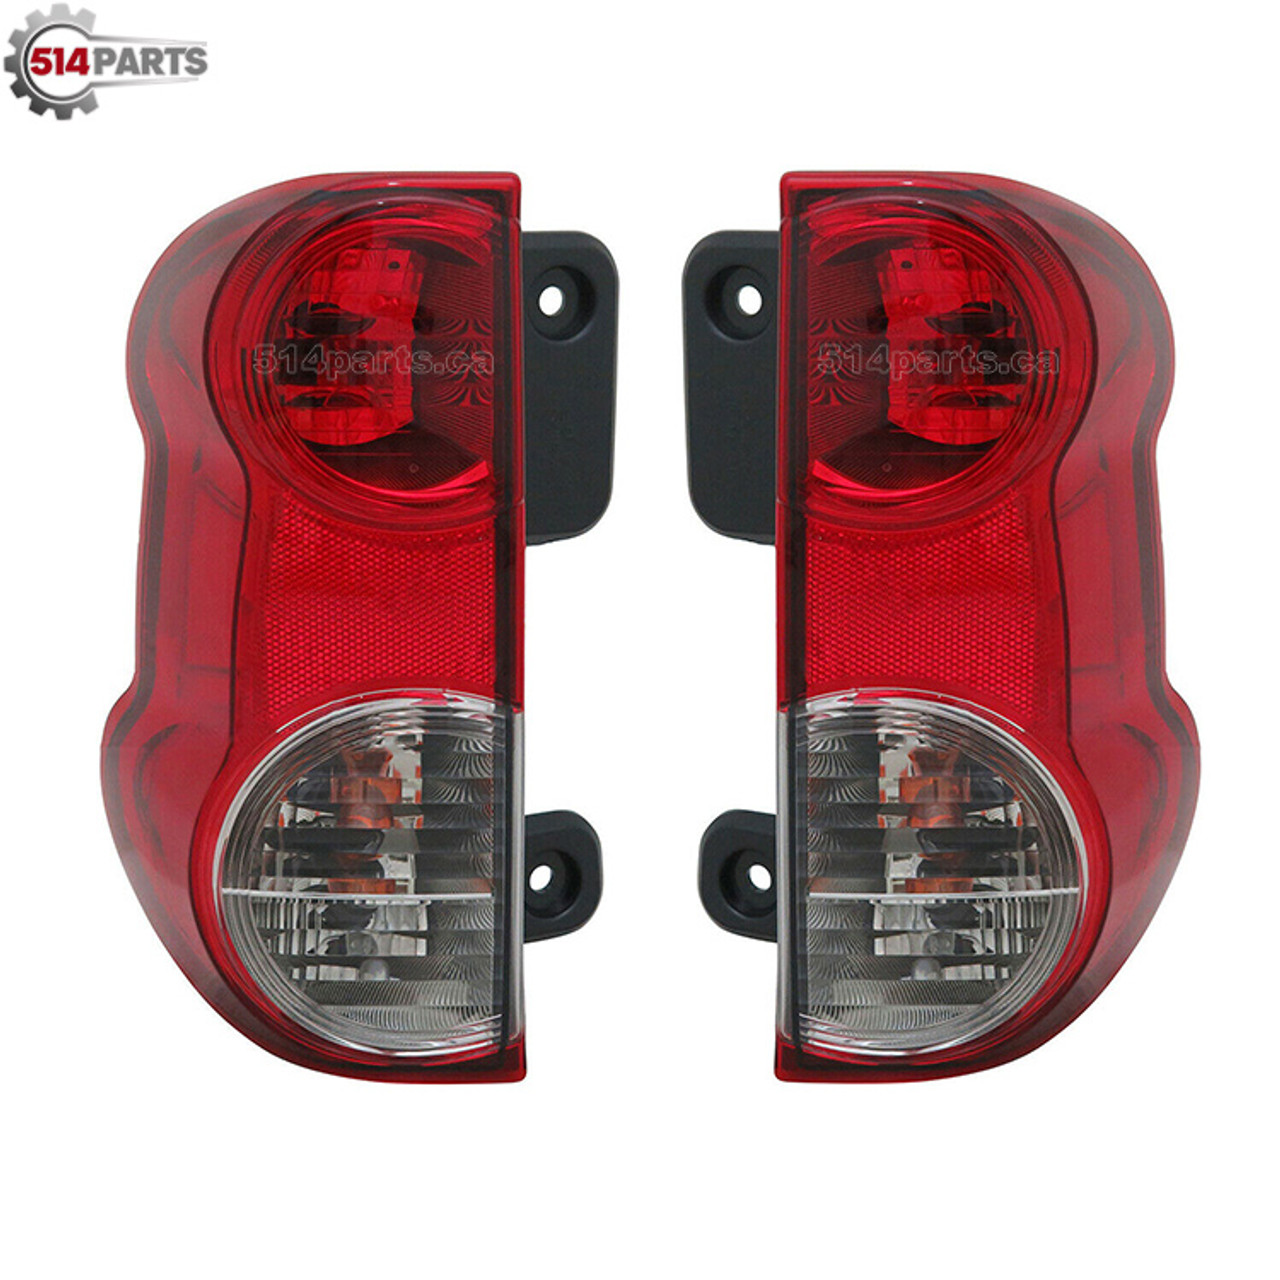 2013 - 2019 NISSAN NV200 TAIL LIGHTS - PHARES ARRIERE